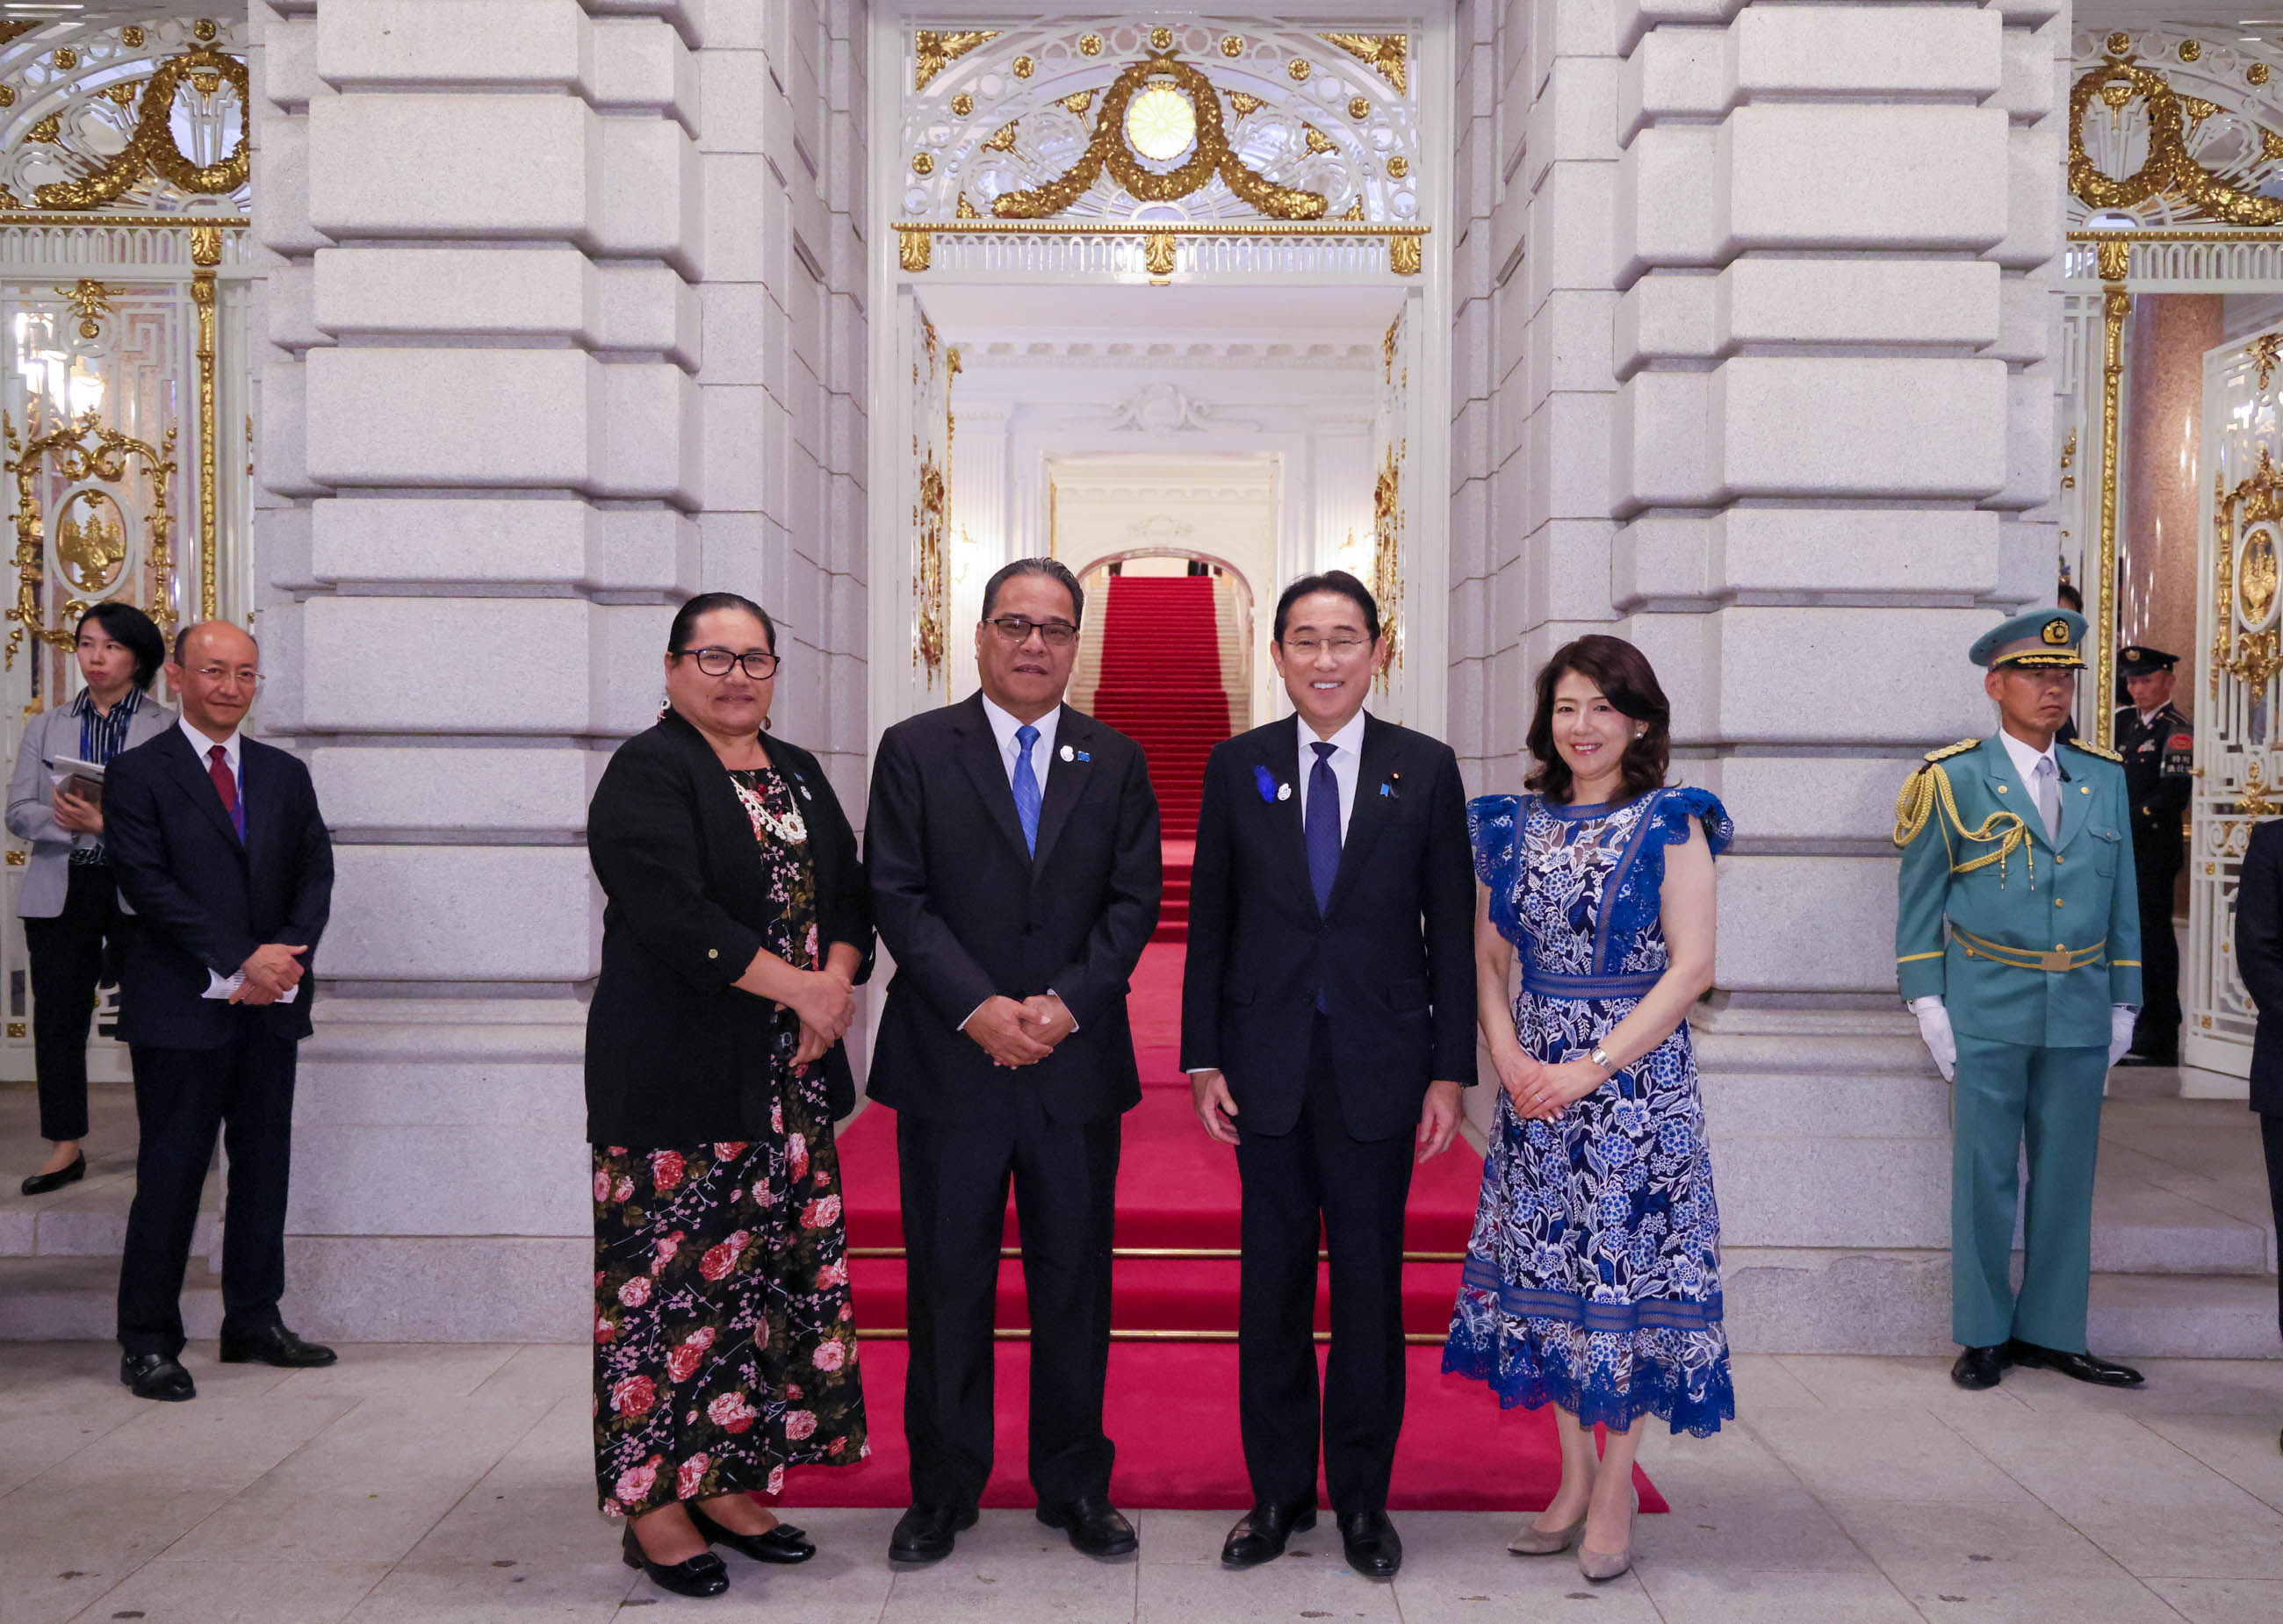 Prime Minister Kishida welcoming H.E. Mr. Wesley W. Simina, President of the Federated States of Micronesia (FSM) and Mrs. Simina 